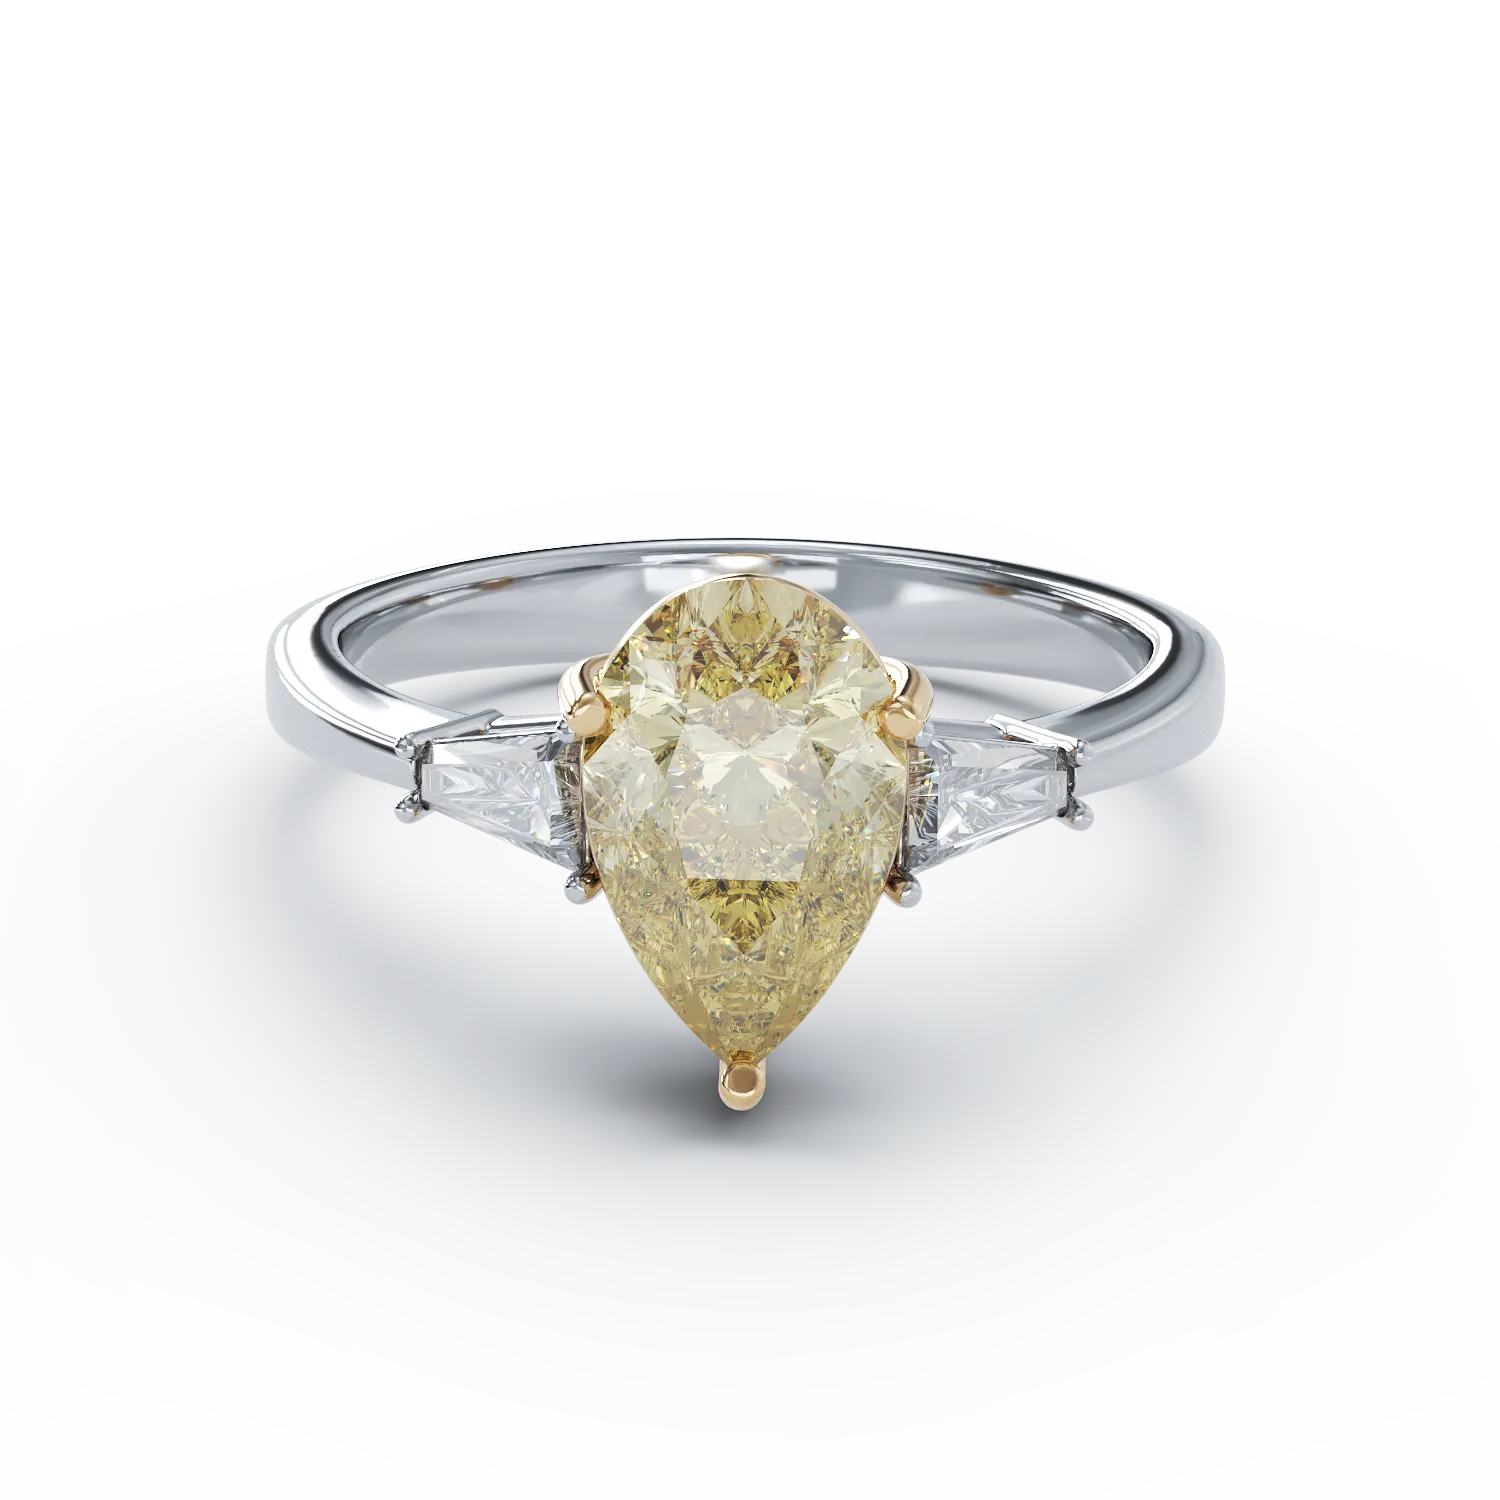 White-yellow gold engagement ring with 2ct diamond and 0.19ct diamonds